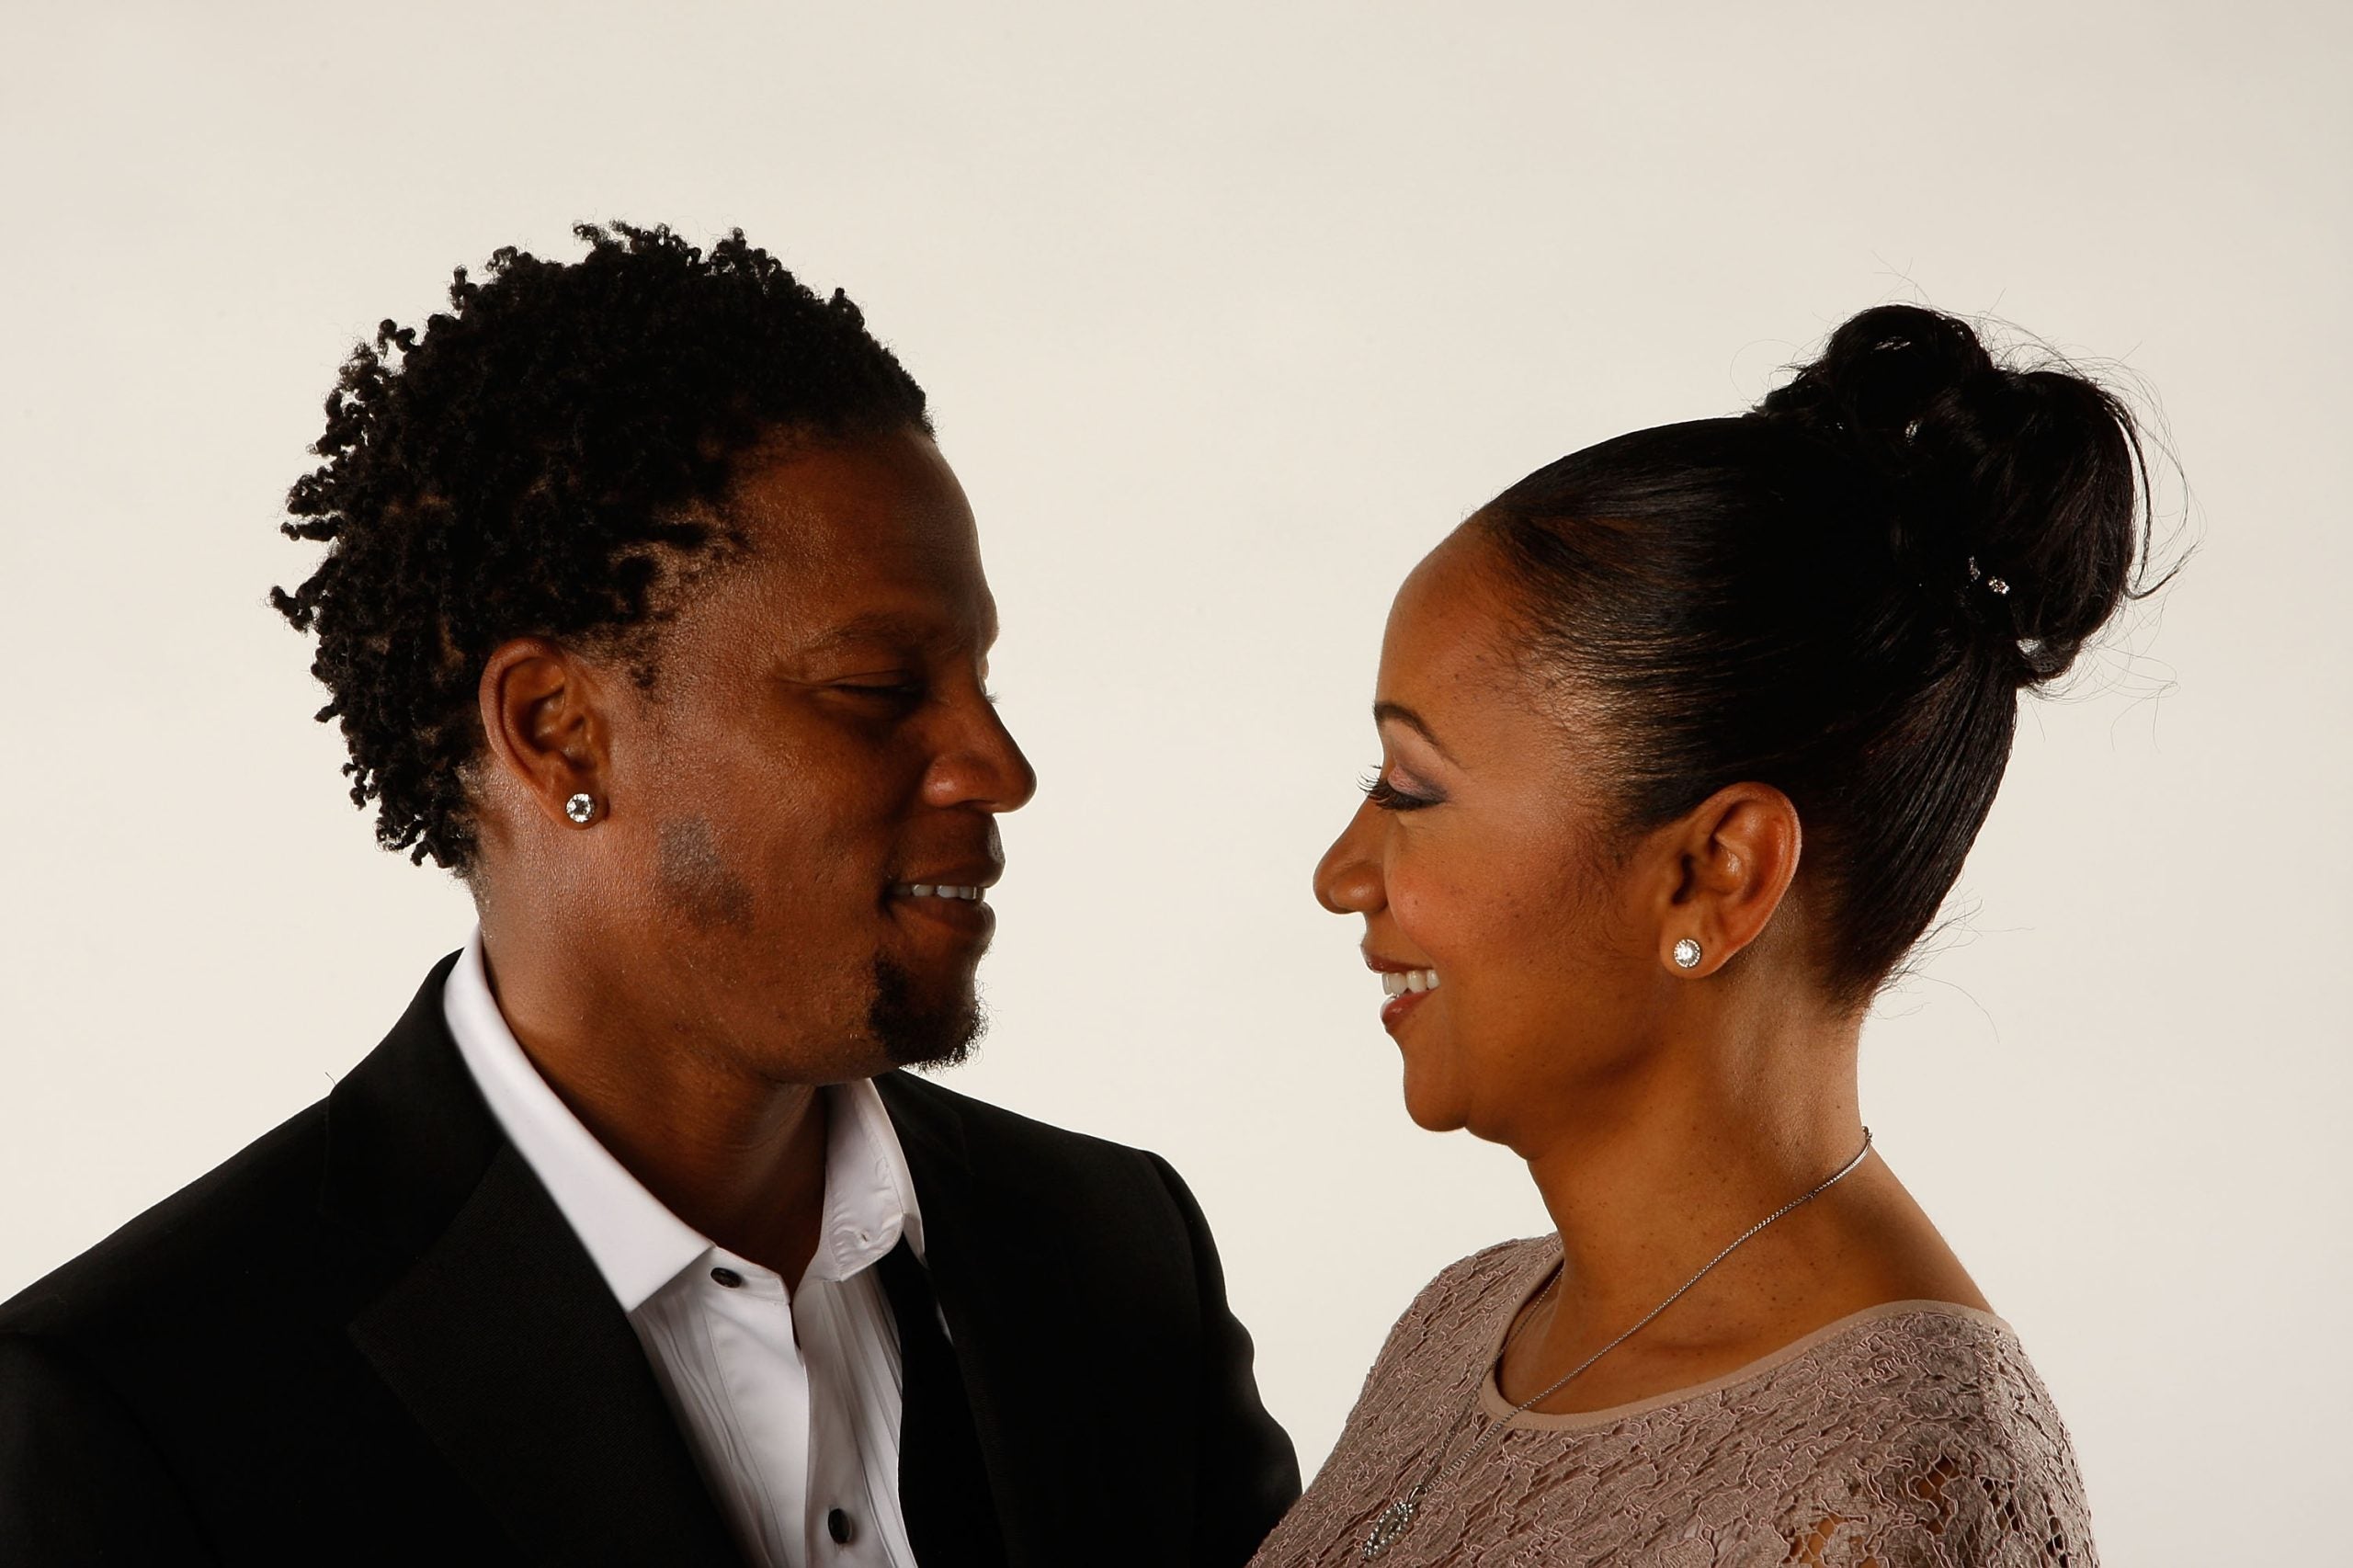 Famous Black Couples Happily Married For More Than 15 Years